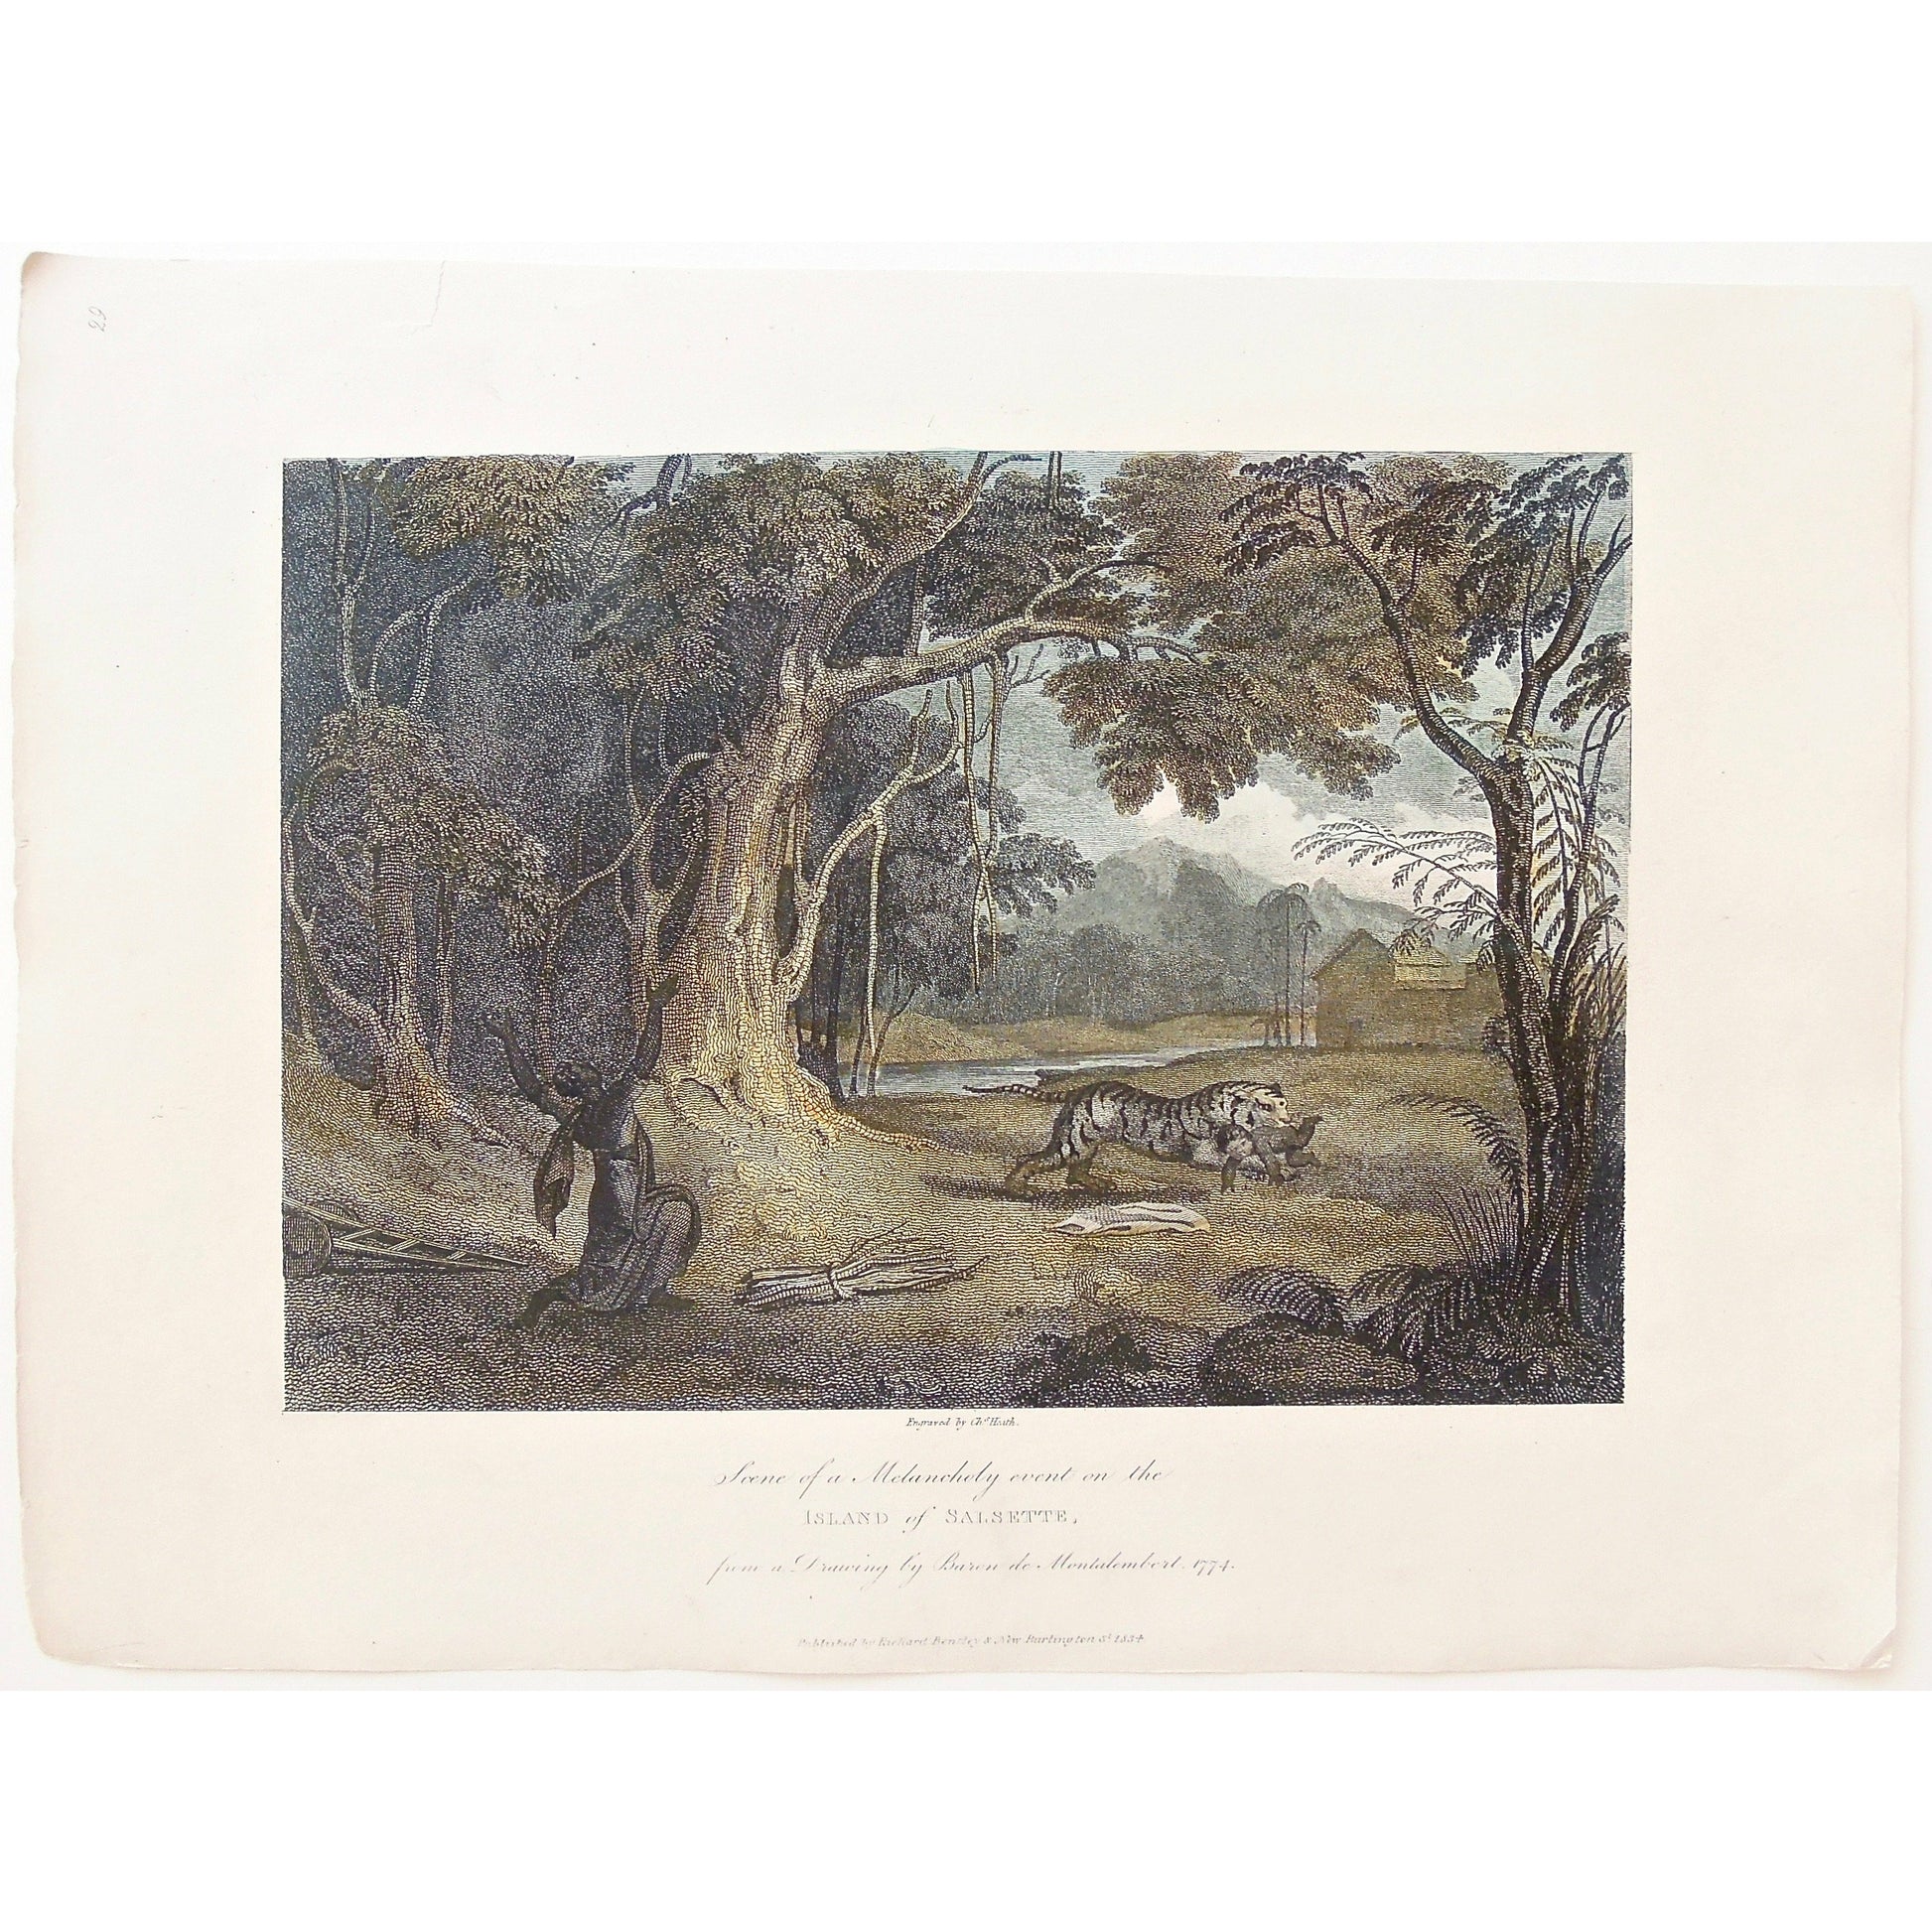 Scene of melancholy, Melancholy event, Island of Salsette, Tiger stealing a baby, Tiger, Stealing a baby, Wildlife, wild animal, Woman Crying, Attack, Bard de Montalembert, 1774, James Forbes, Forbes, Eliza Rosée, Countess De Montalembert, Oriental Memoirs, Narrative of Seventeen Years Residence in India, Bentley, 8 New Burlington Street, London, Heath, Nichols & Son, 25 Parliament Street, 1834, Steel engraving, Antique Print, Antique, Prints, Vintage Prints, Vintage, Collector, Collectable, Original, Uniq